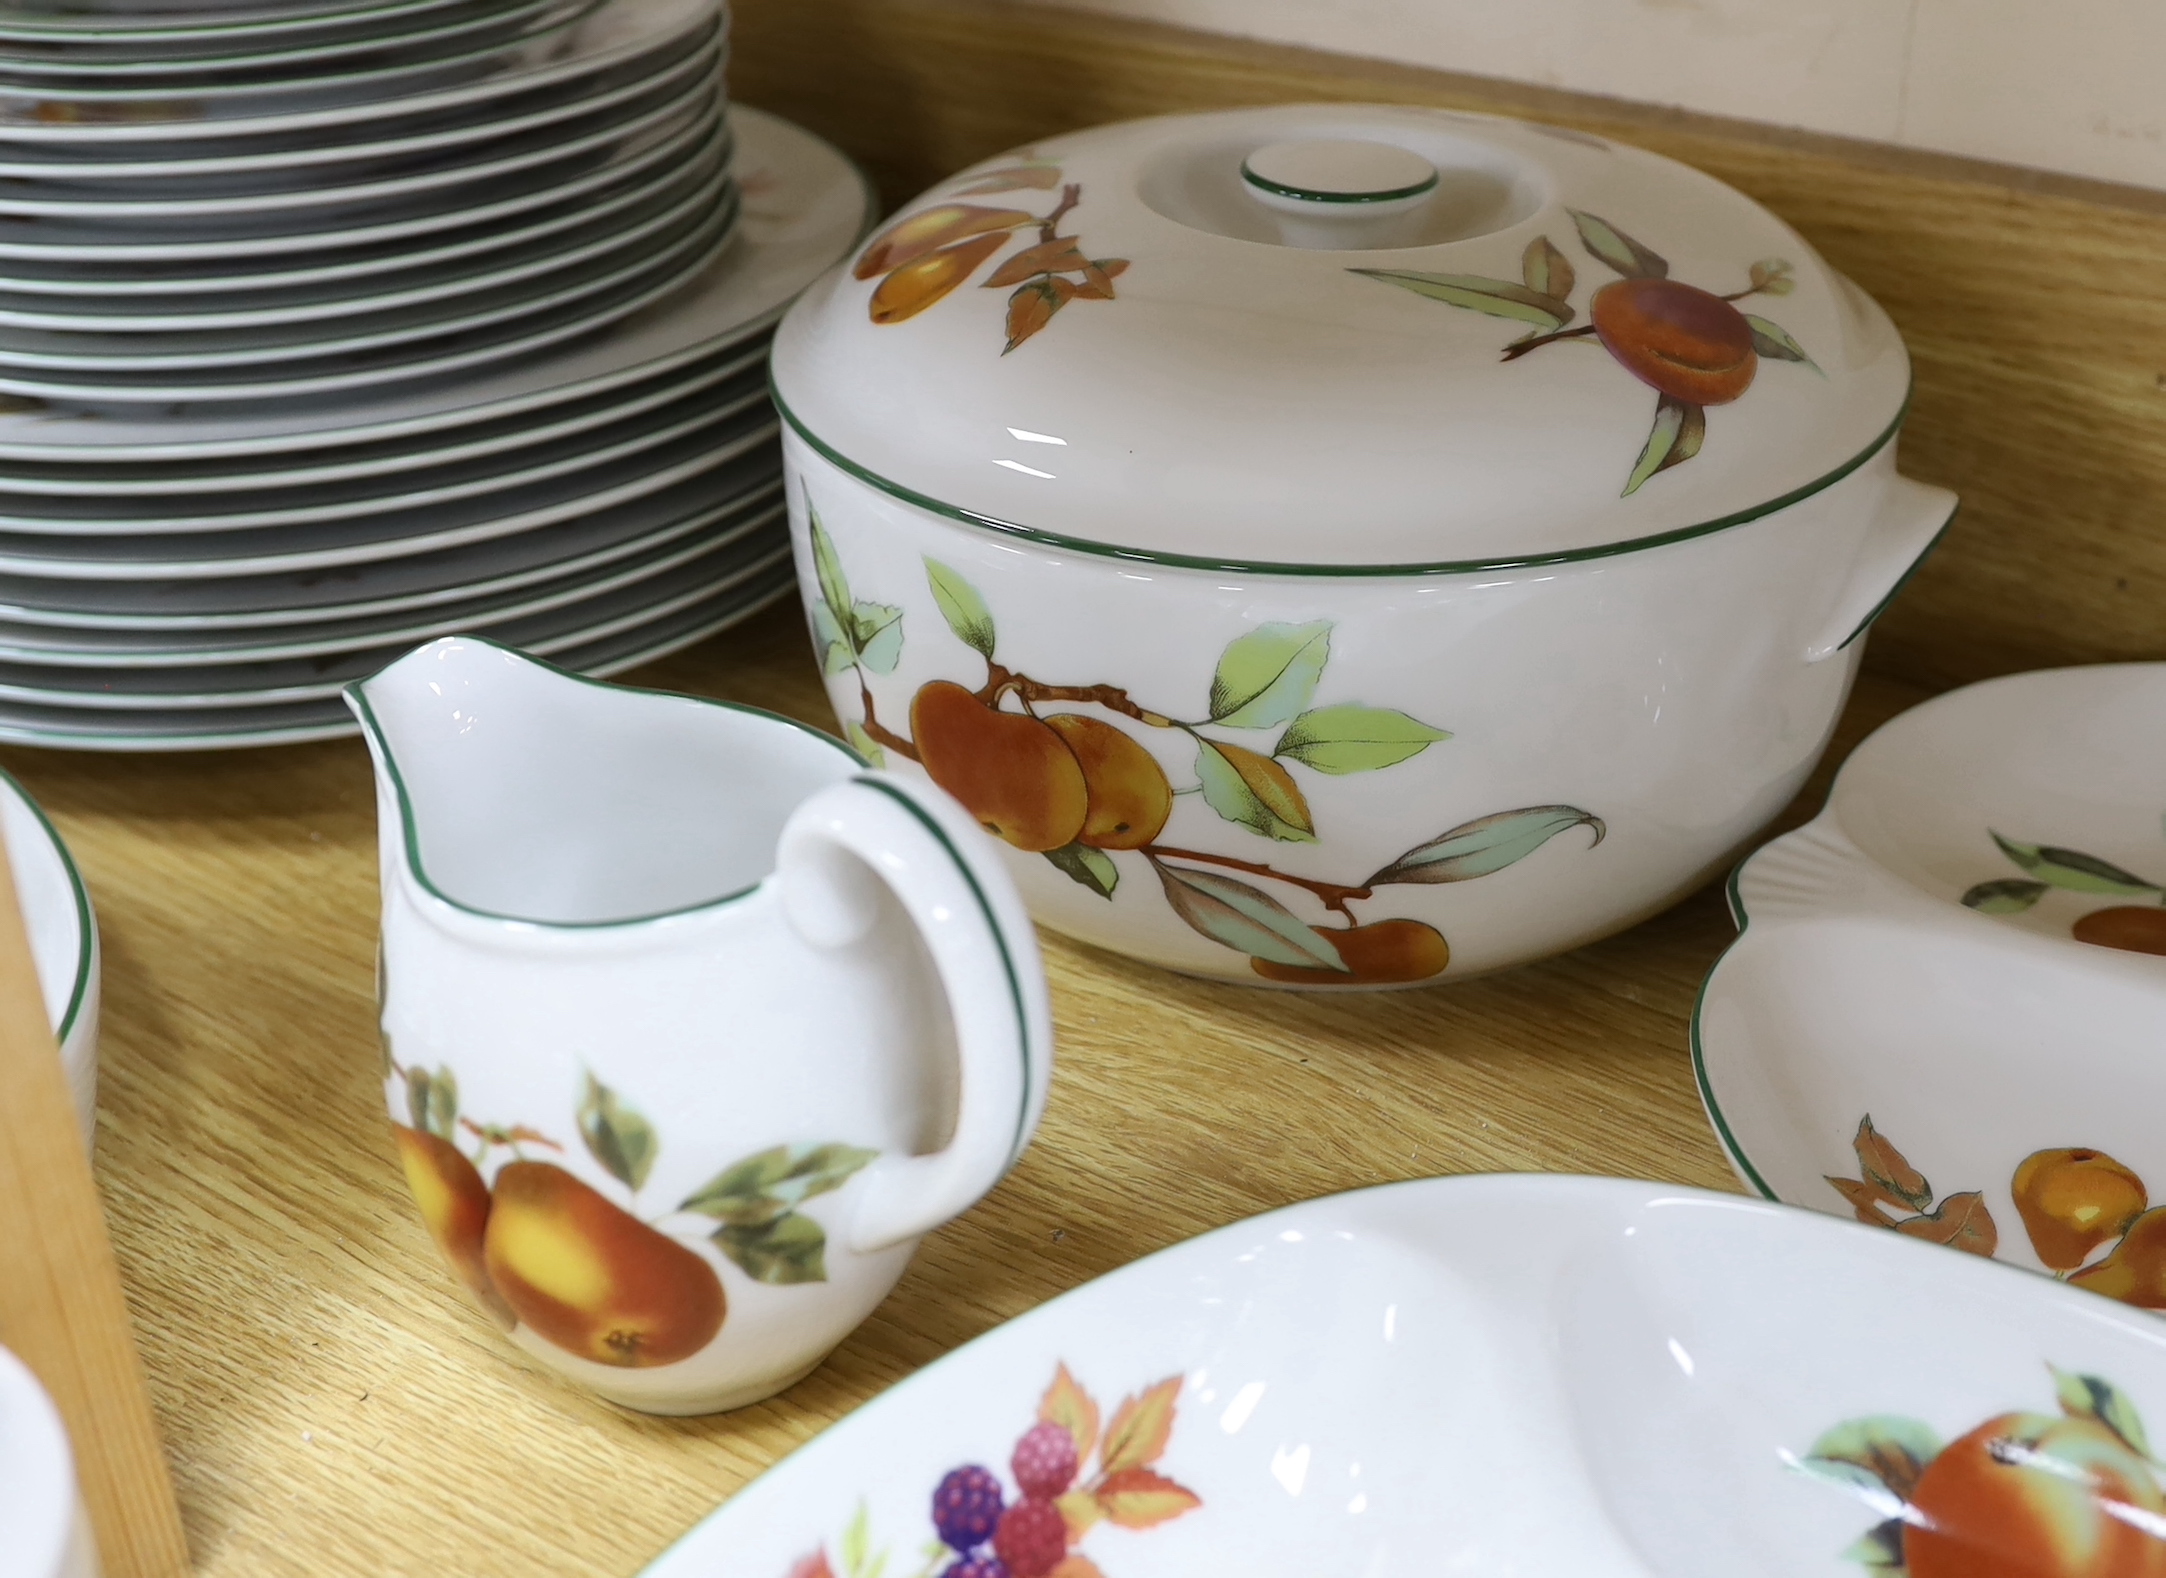 A large quantity of Royal Worcester Evesham Vale serving dishes and dinnerwares